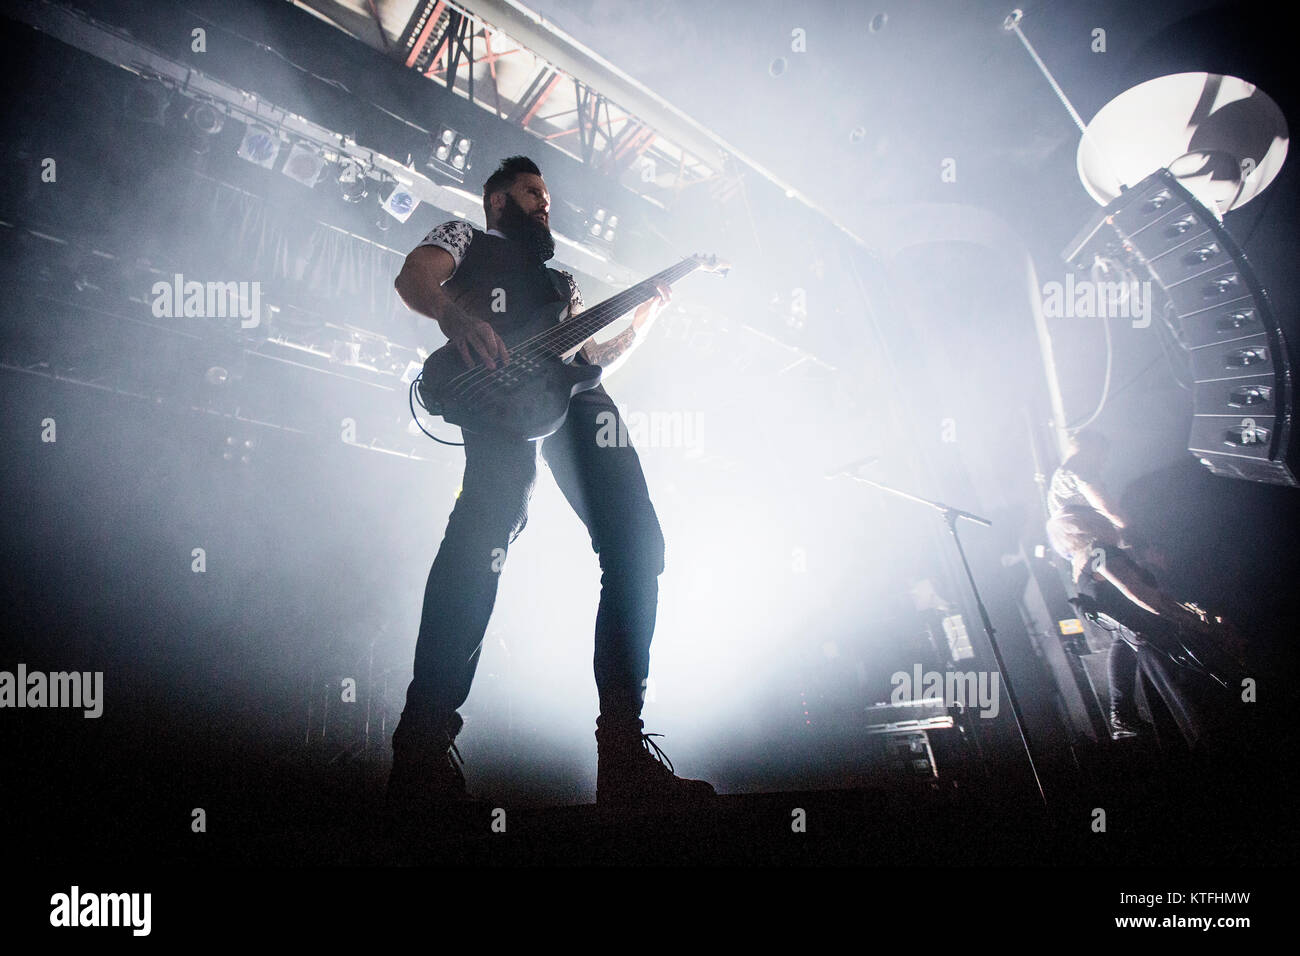 The American Christian rock band Skillet performs a live concert at Sentrum Scene in Oslo. Here bass player and vocalist John Cooper is seen live on stage. Norway, 01/06 2016. Stock Photo